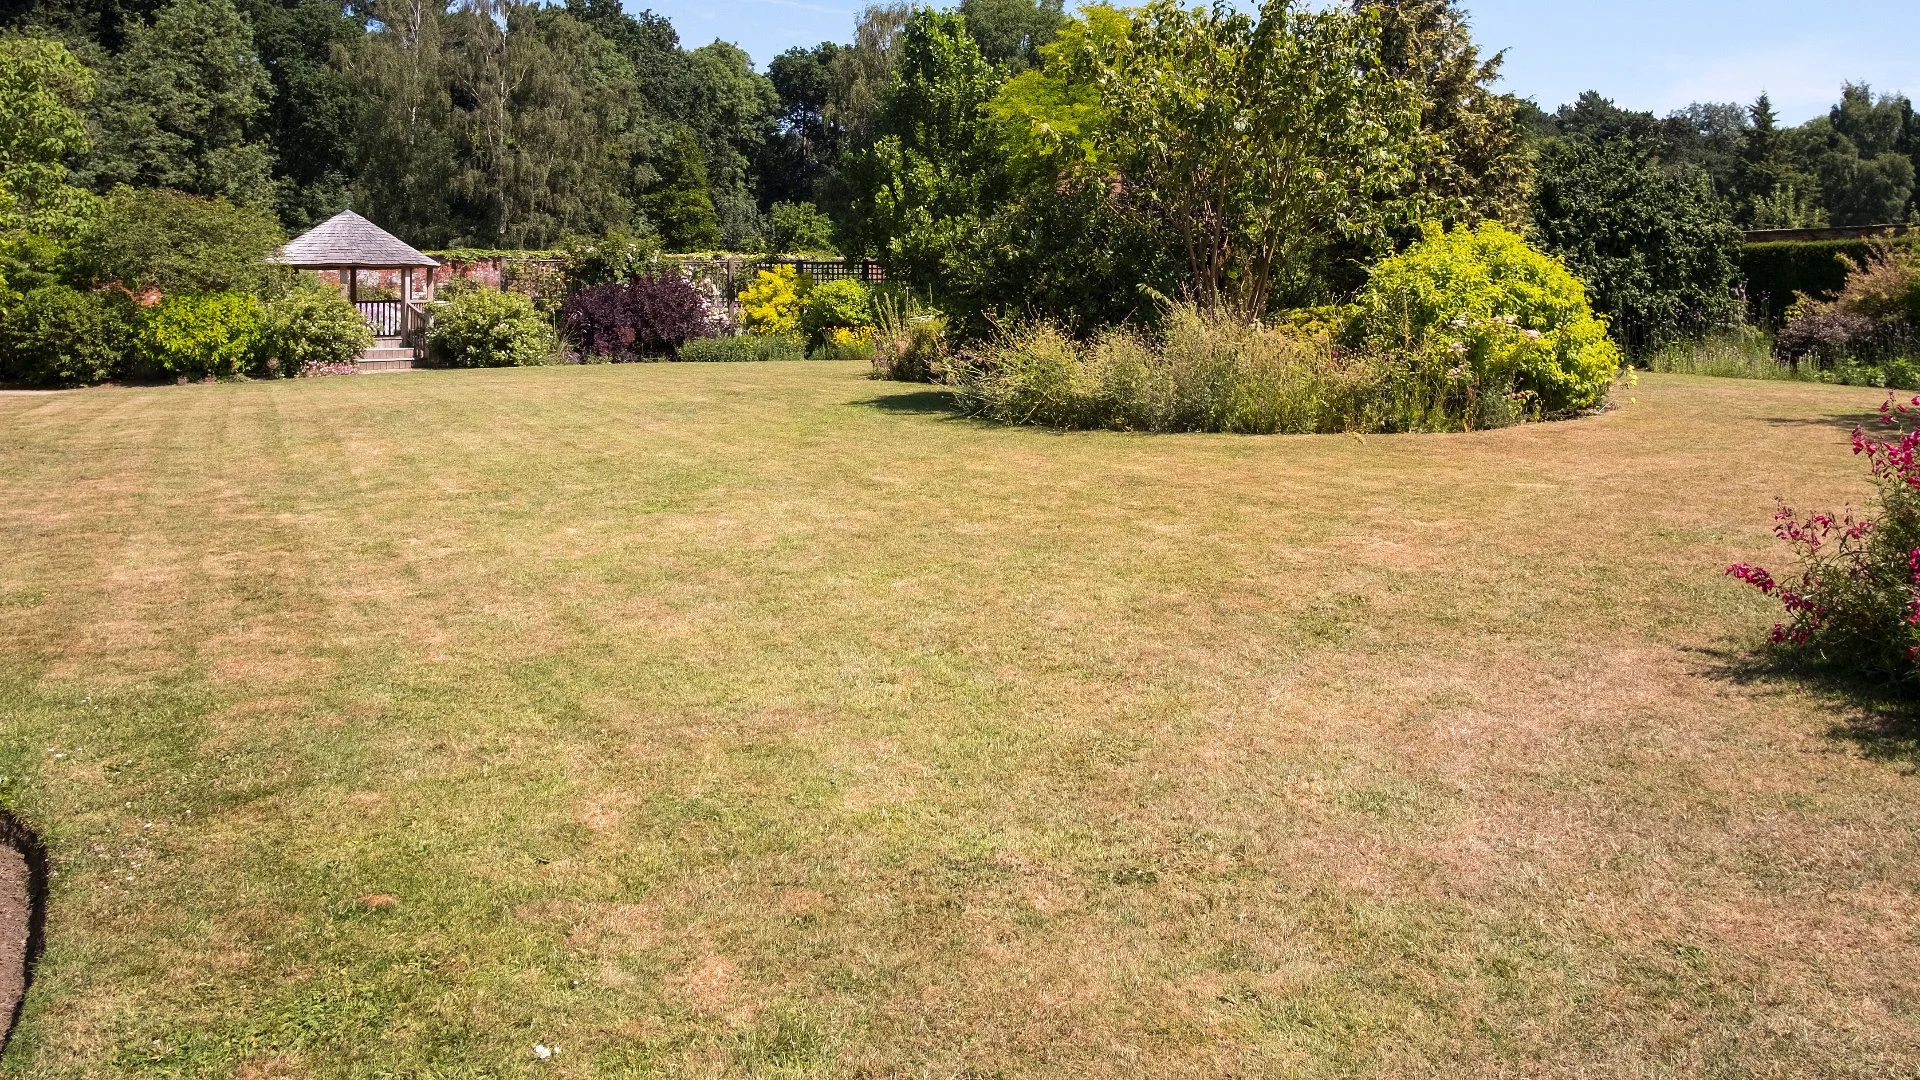 Drought or Normal Lawn Dormancy? How To Tell Between the Two & What To Do